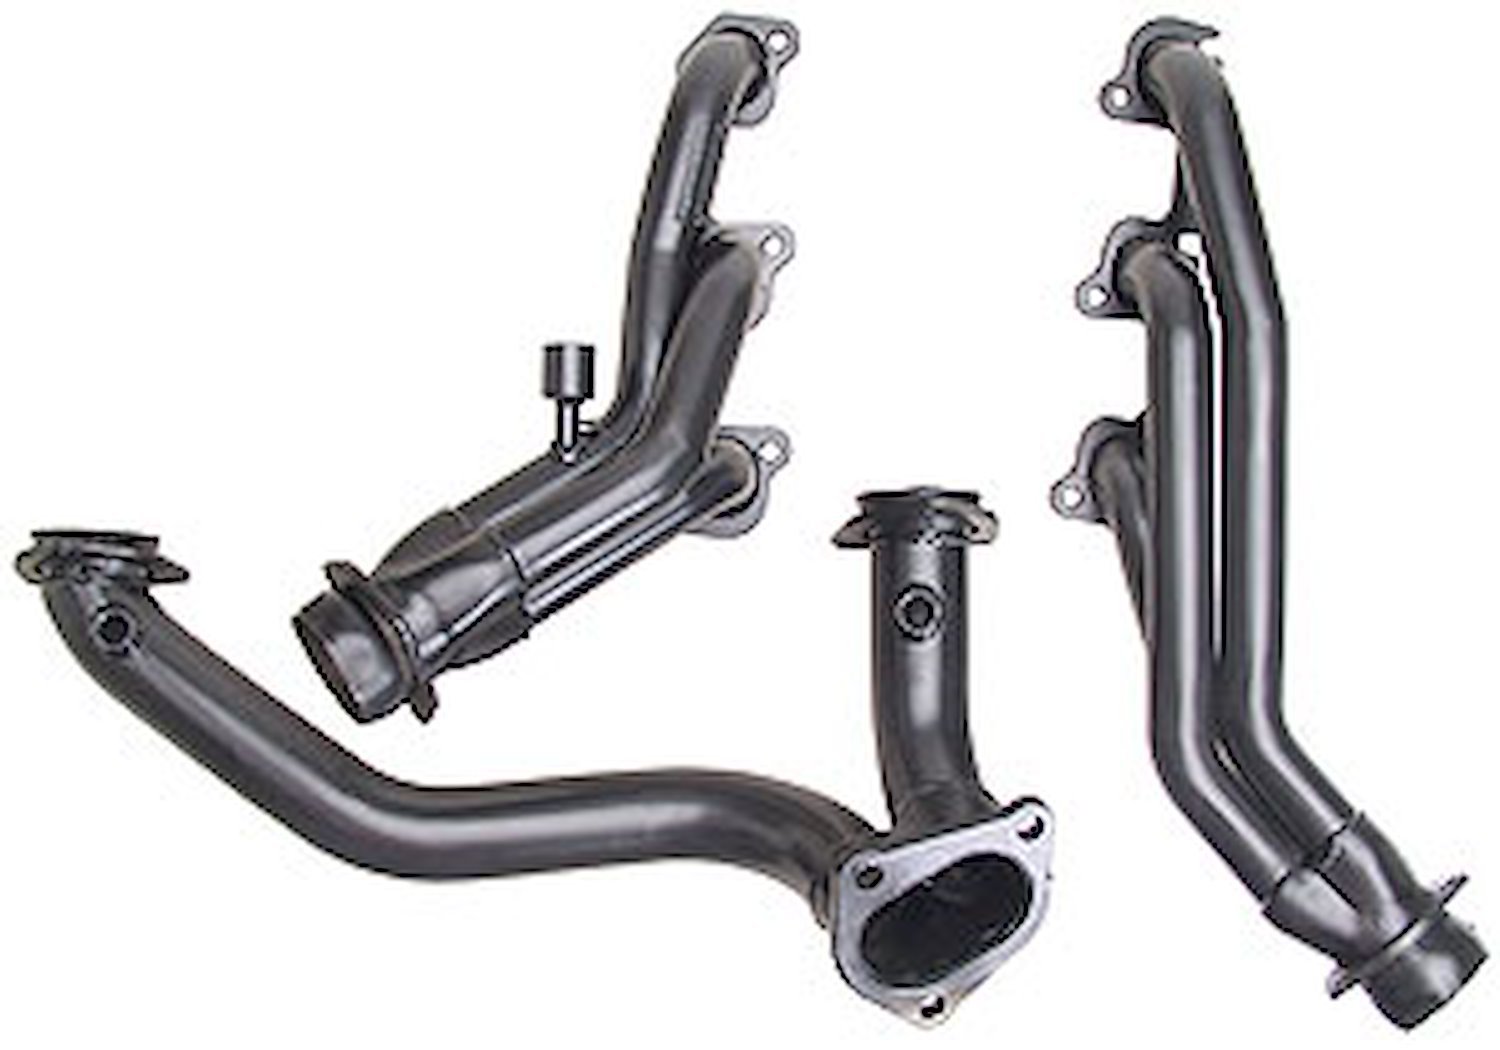 Standard Duty Uncoated Headers for 1993-1994 Ford Ranger 2wd/4wd, 1993-1996 Ford Explorer 2wd/4wd